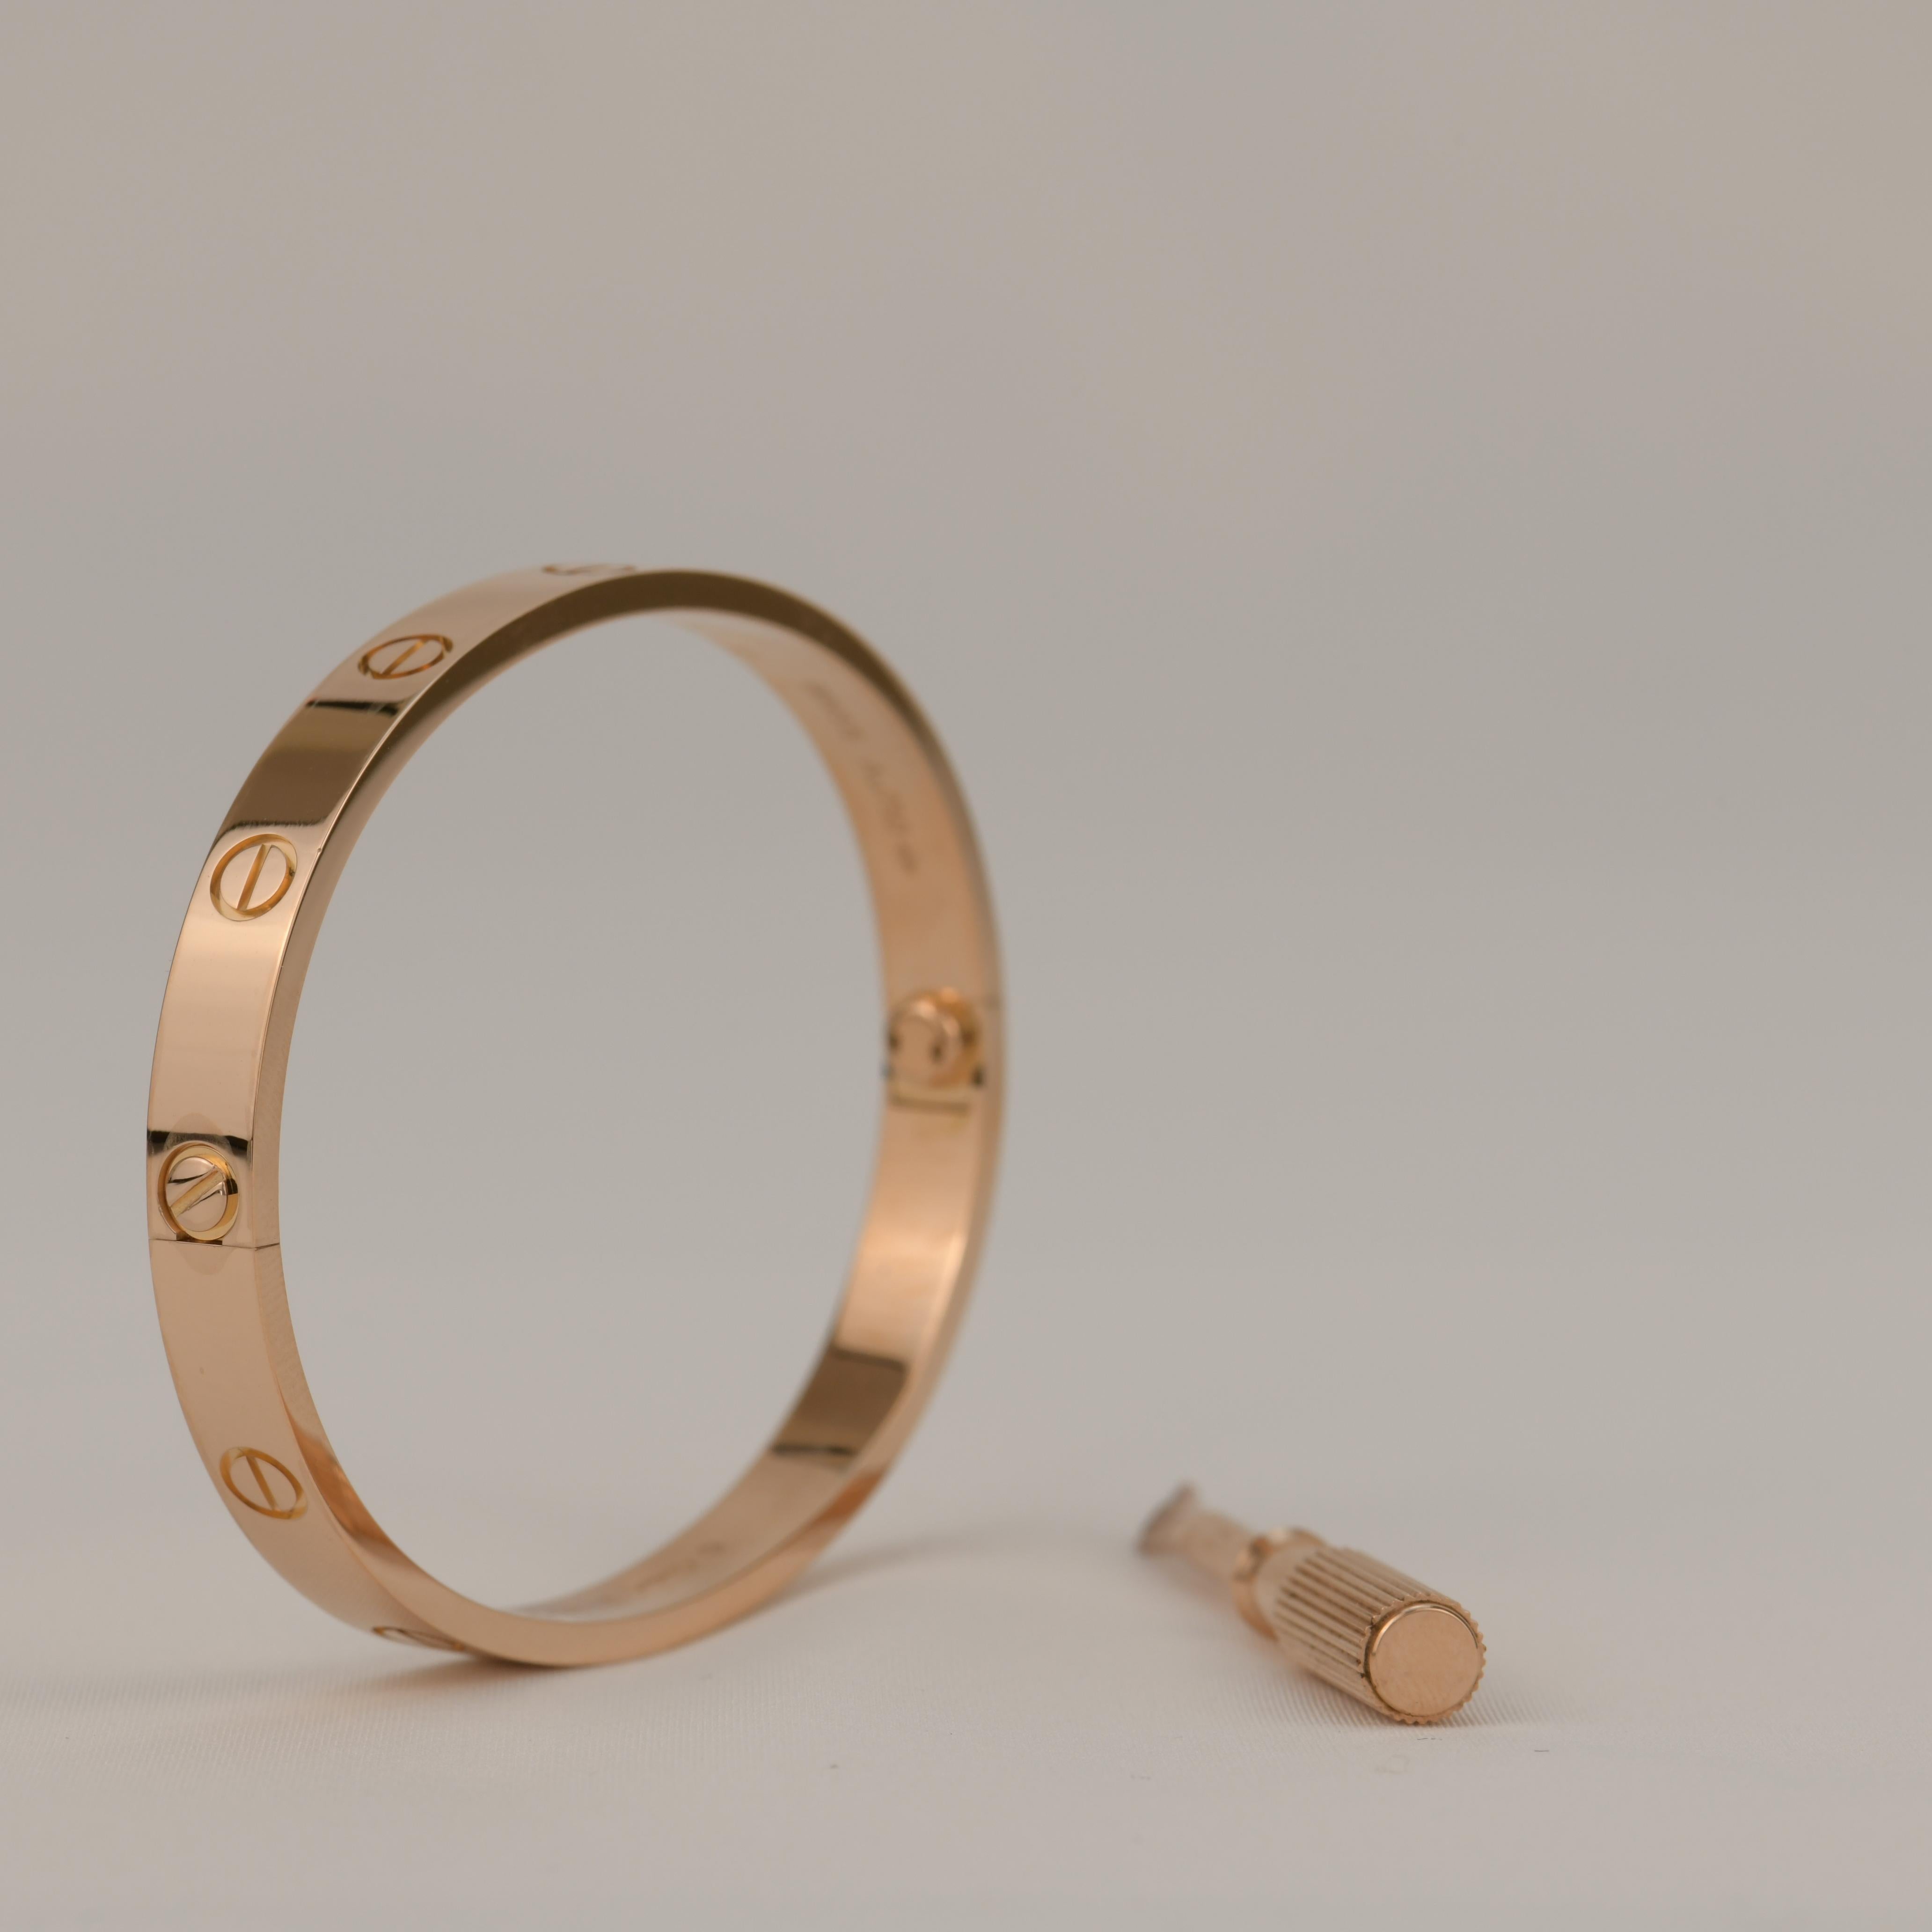 Cartier Love Rose Gold Bracelet B6035600 with Box and Paper 1